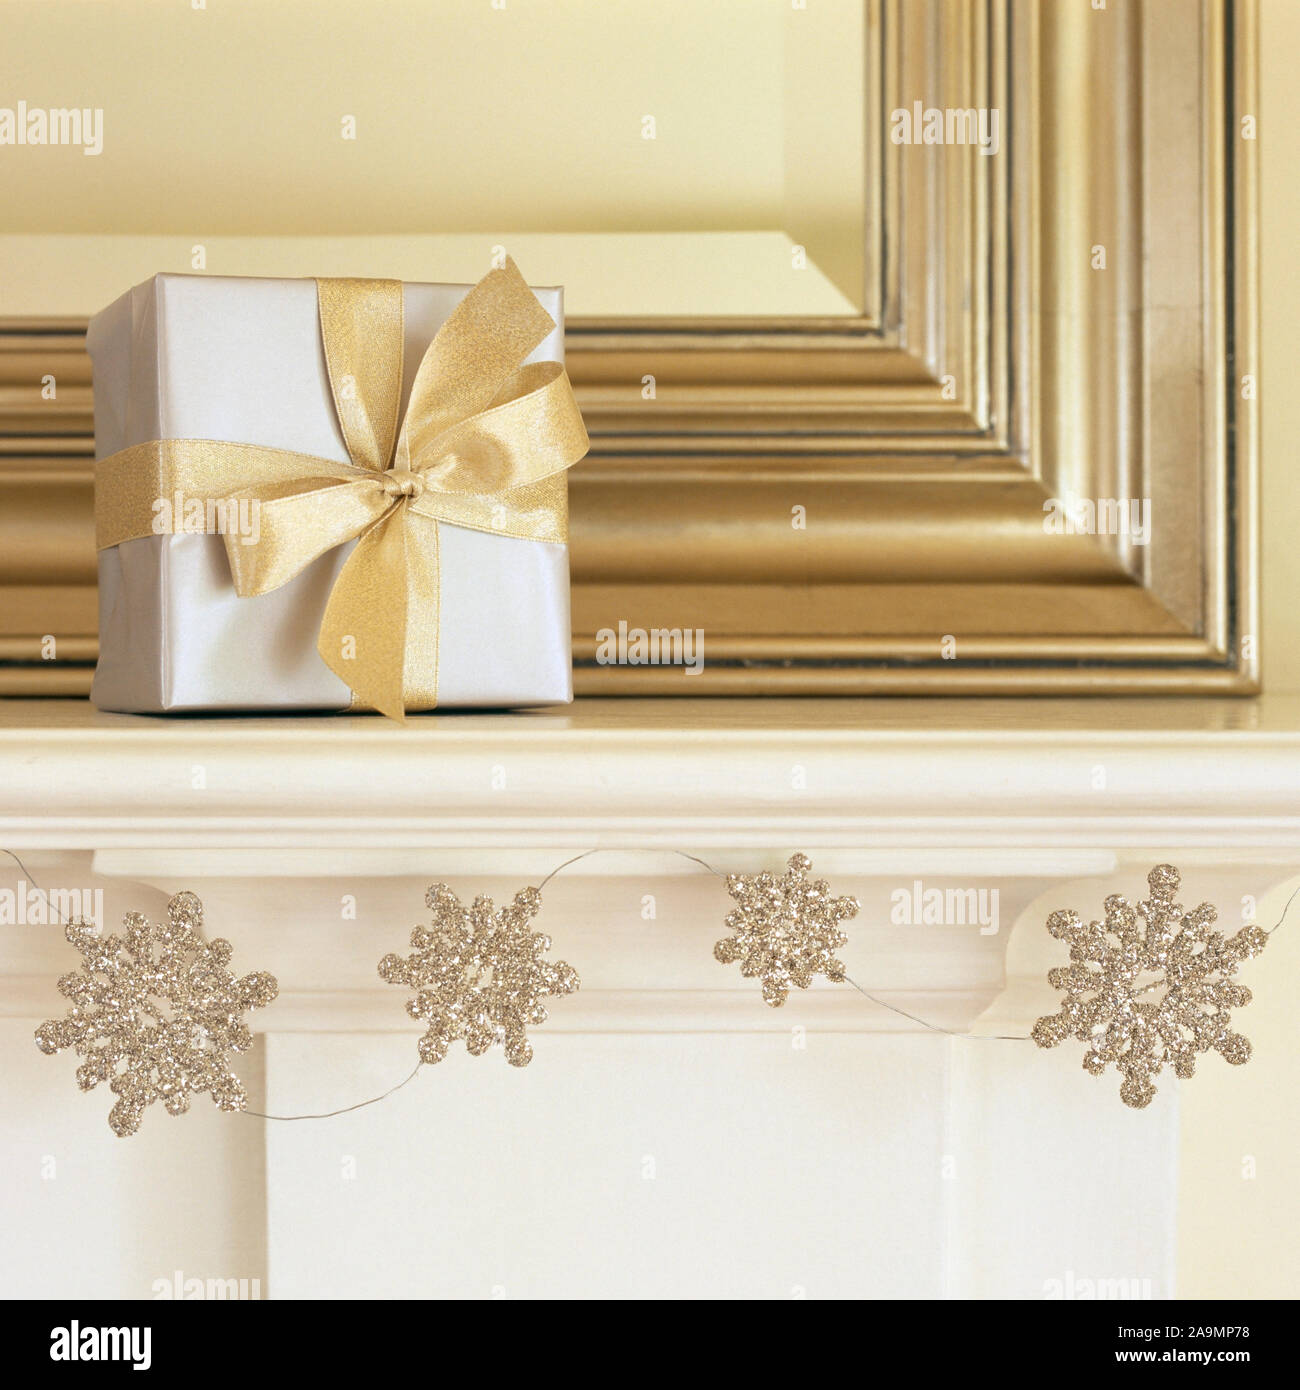 Silver and gold Christmas gift present on mantel with glitter snowflake garland. Beautiful, elegant, fancy holiday home interior decor decorating deco Stock Photo